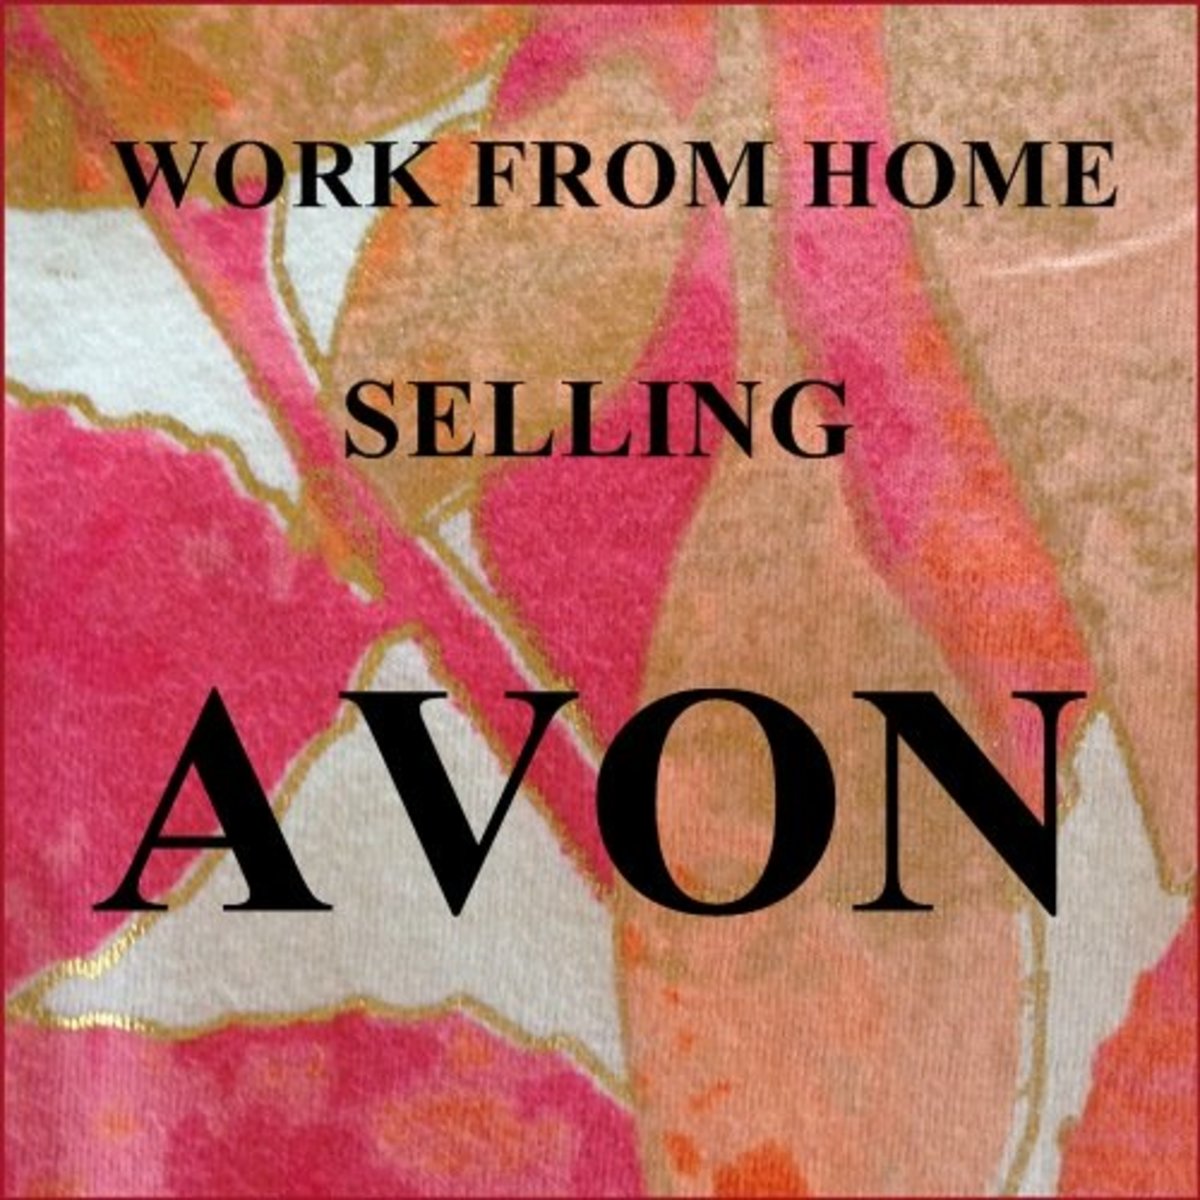 Can You Make Money Selling Avon?